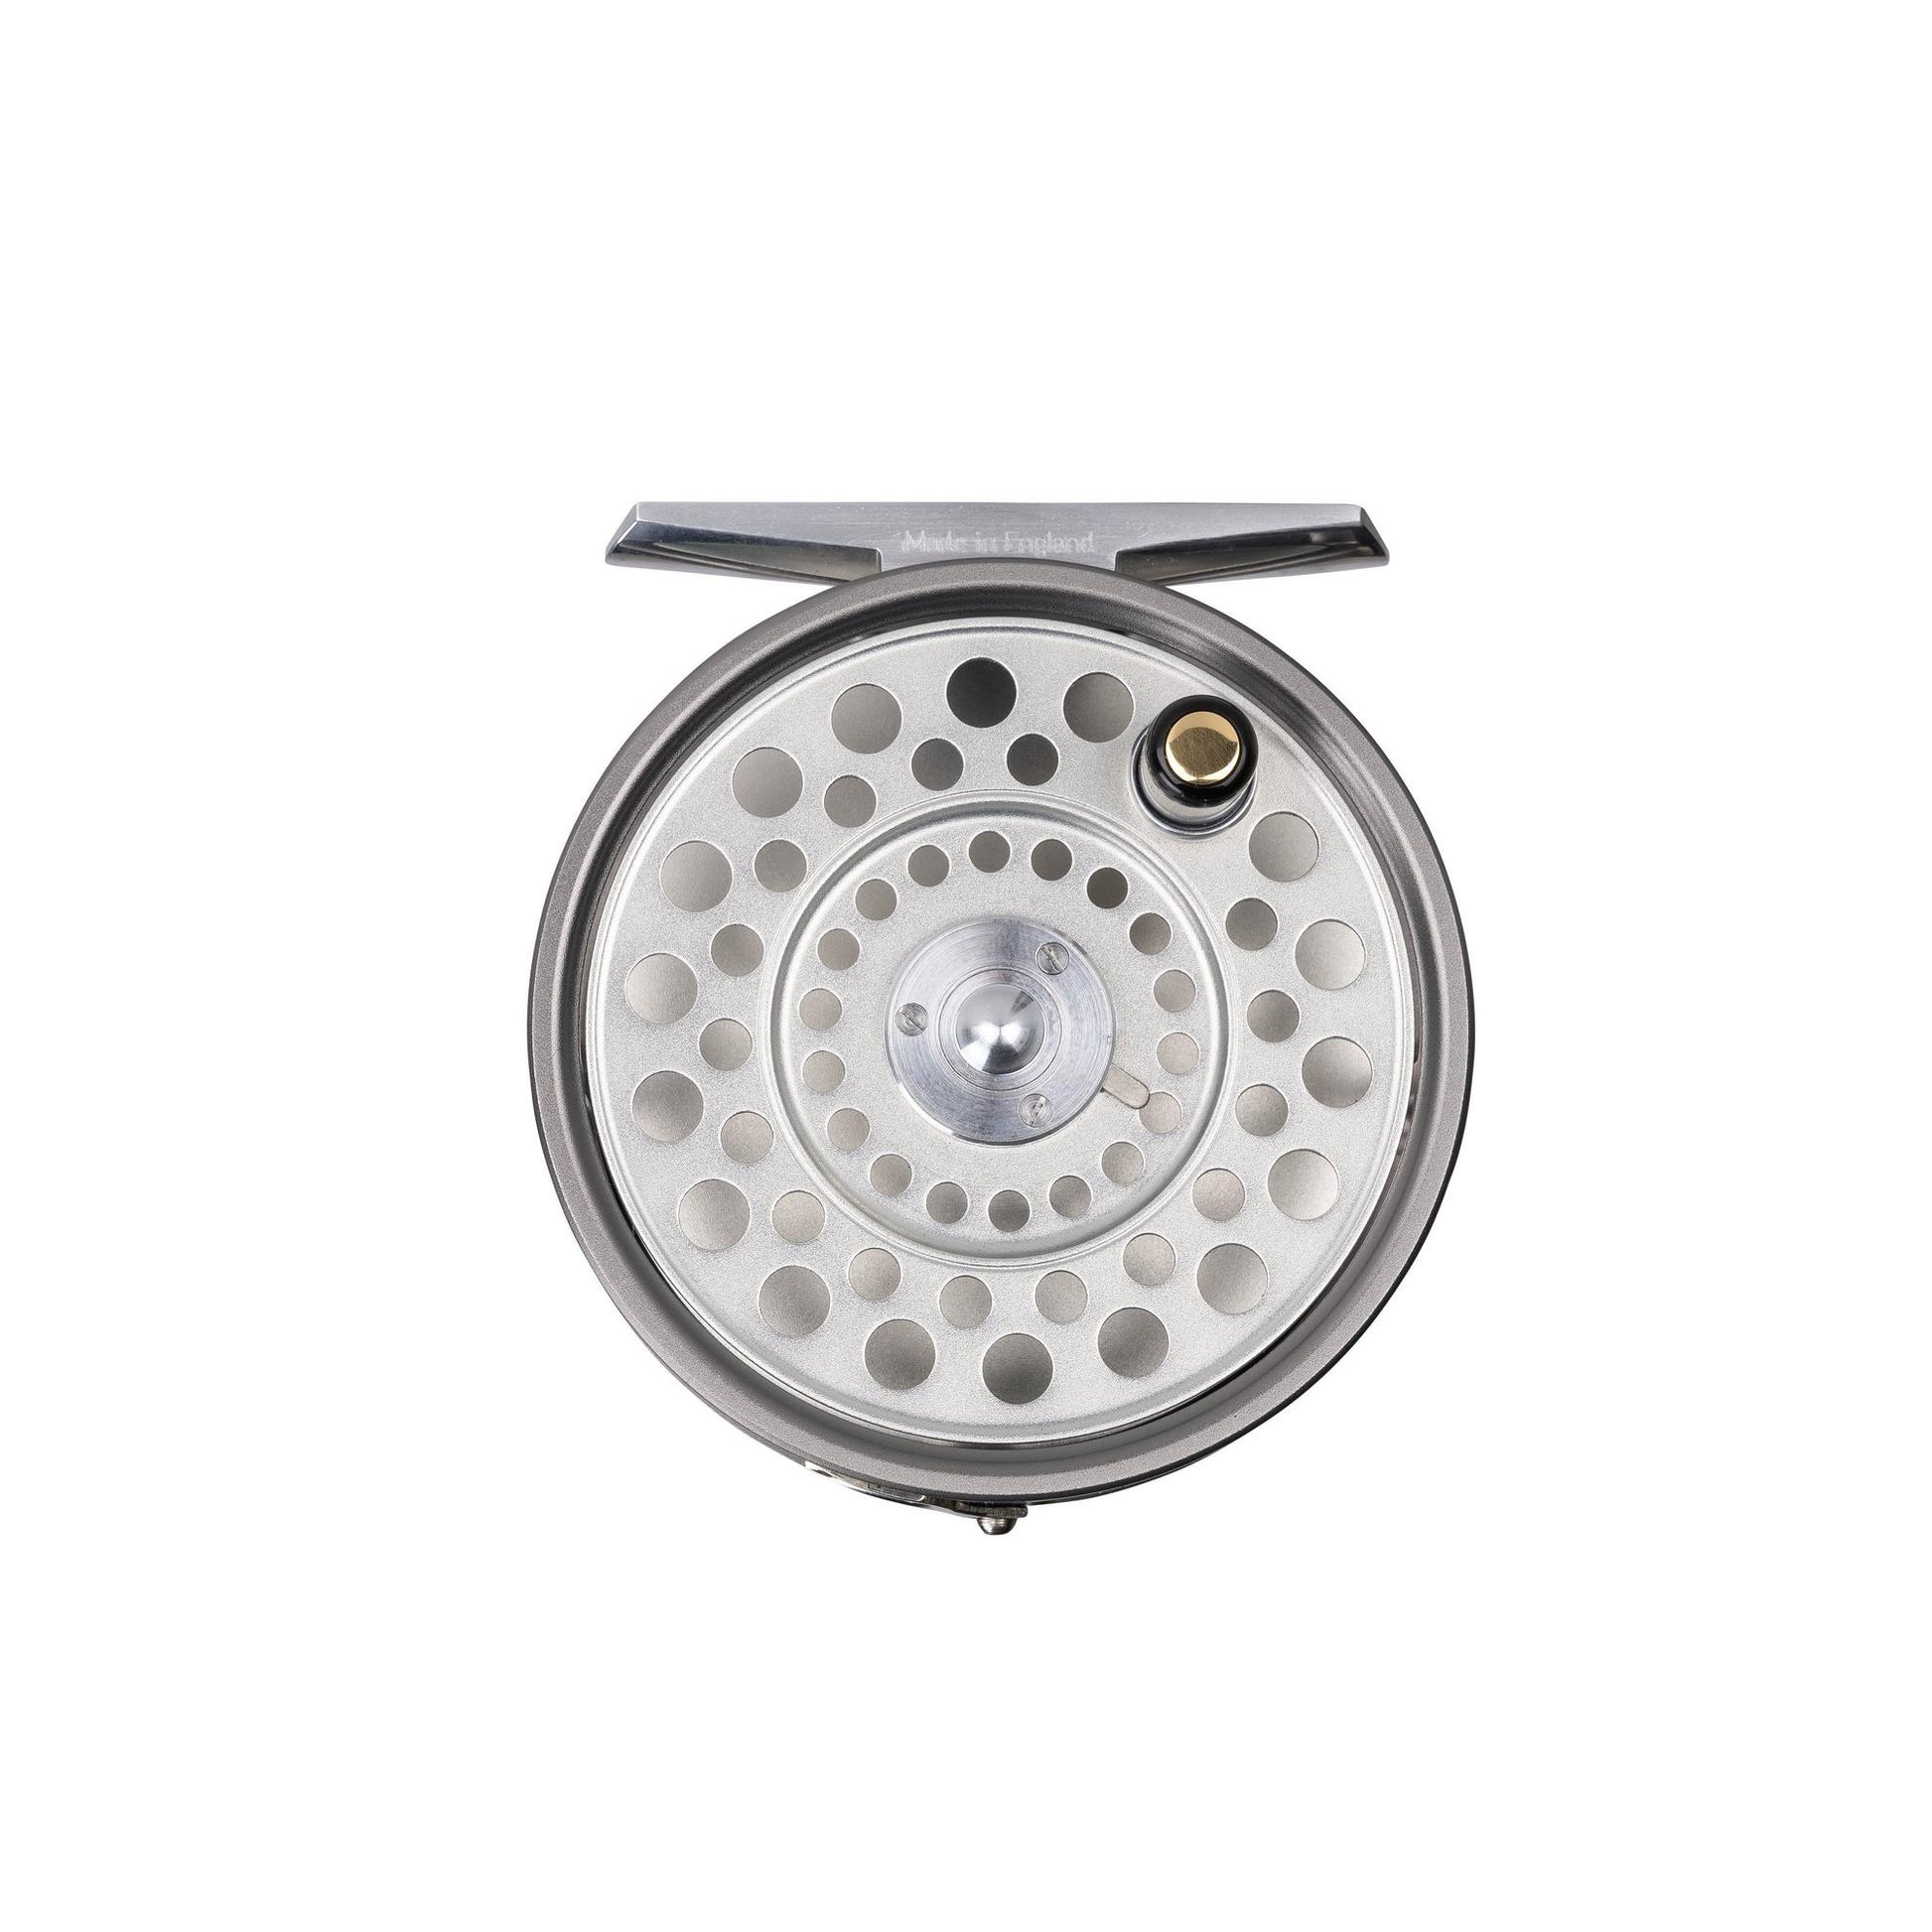 Hardy Featherweight 4/5wt Fly Reel For Sale- Light & Durable